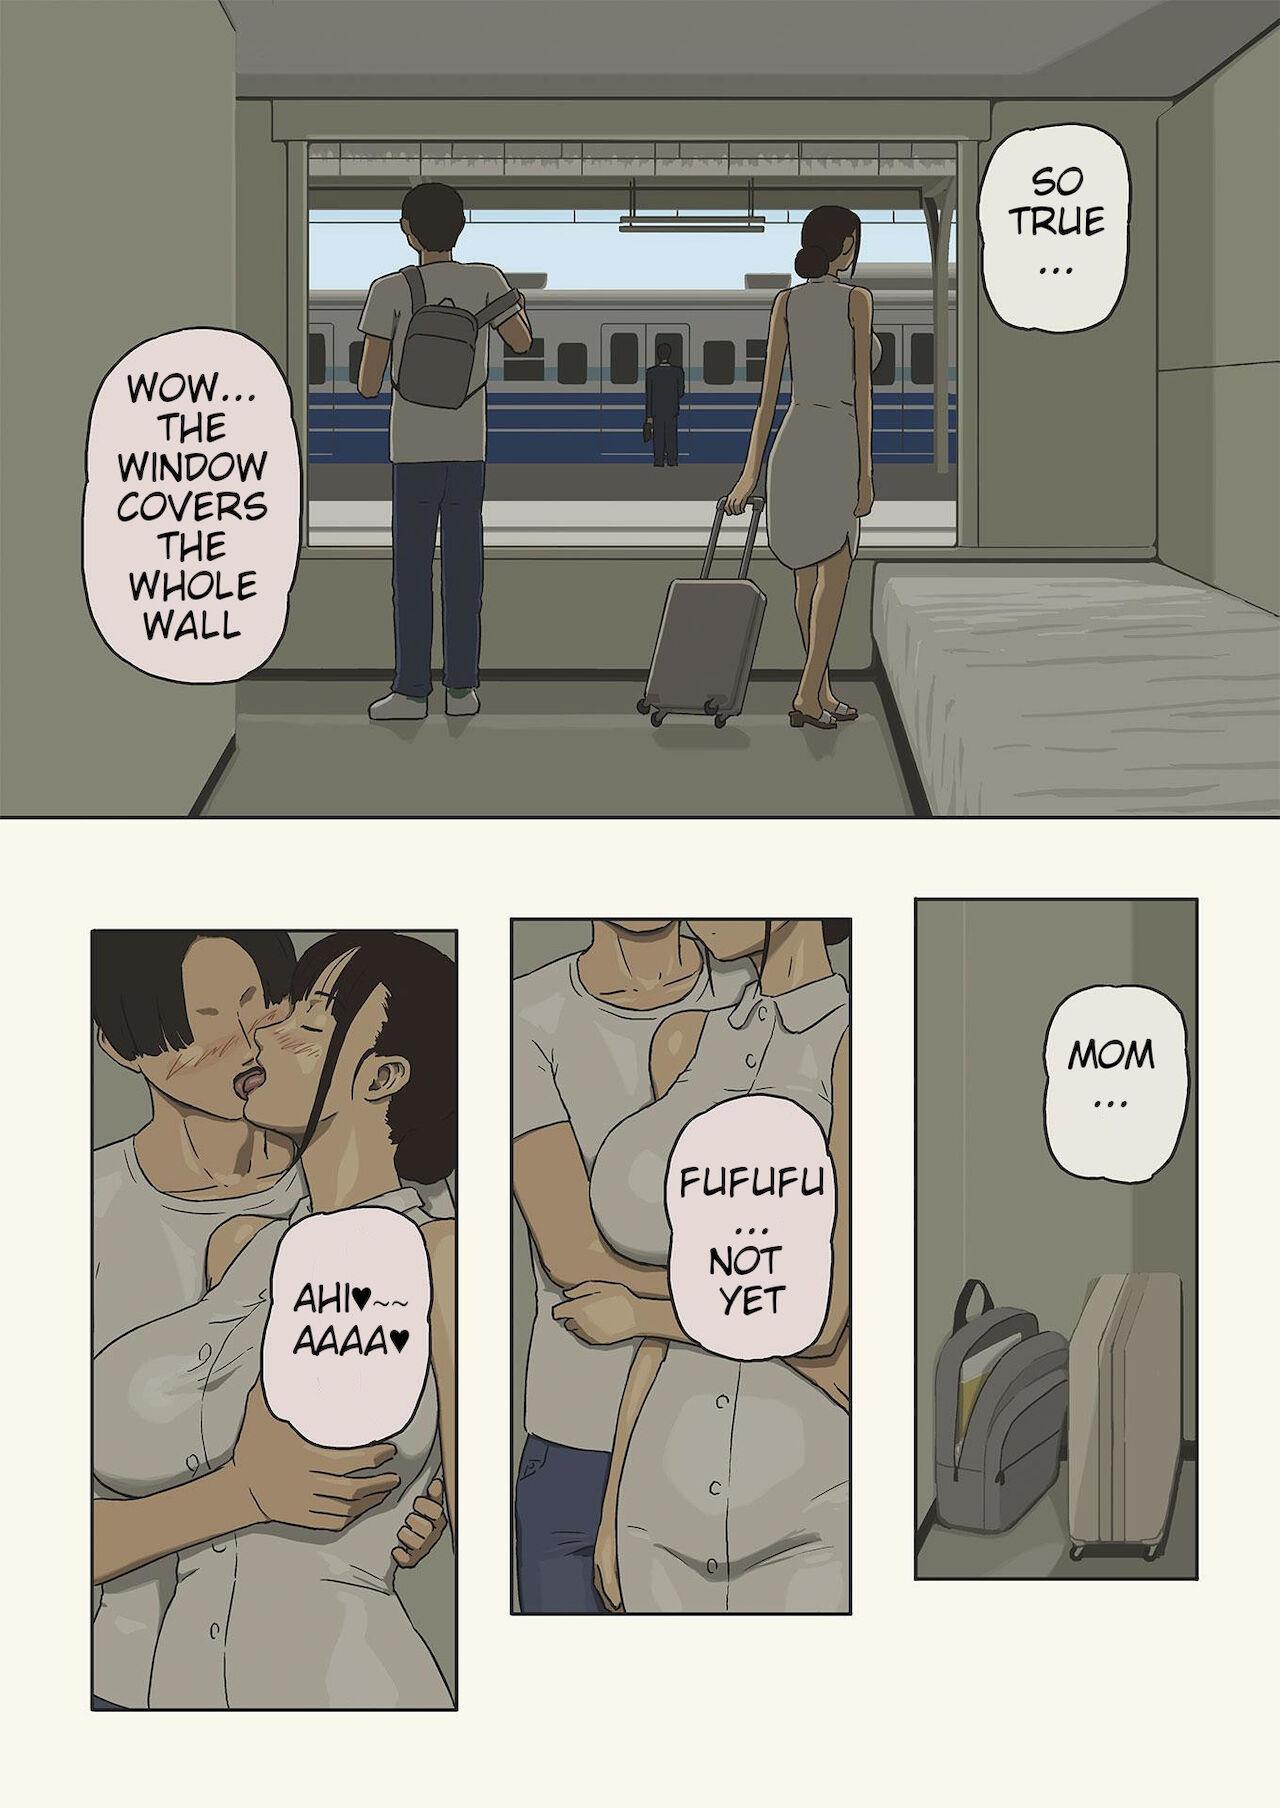 Chudai Share 4 - A Parent and Child in the Window of a Train Car Seeking Love and Sex - Original Deutsche - Page 6